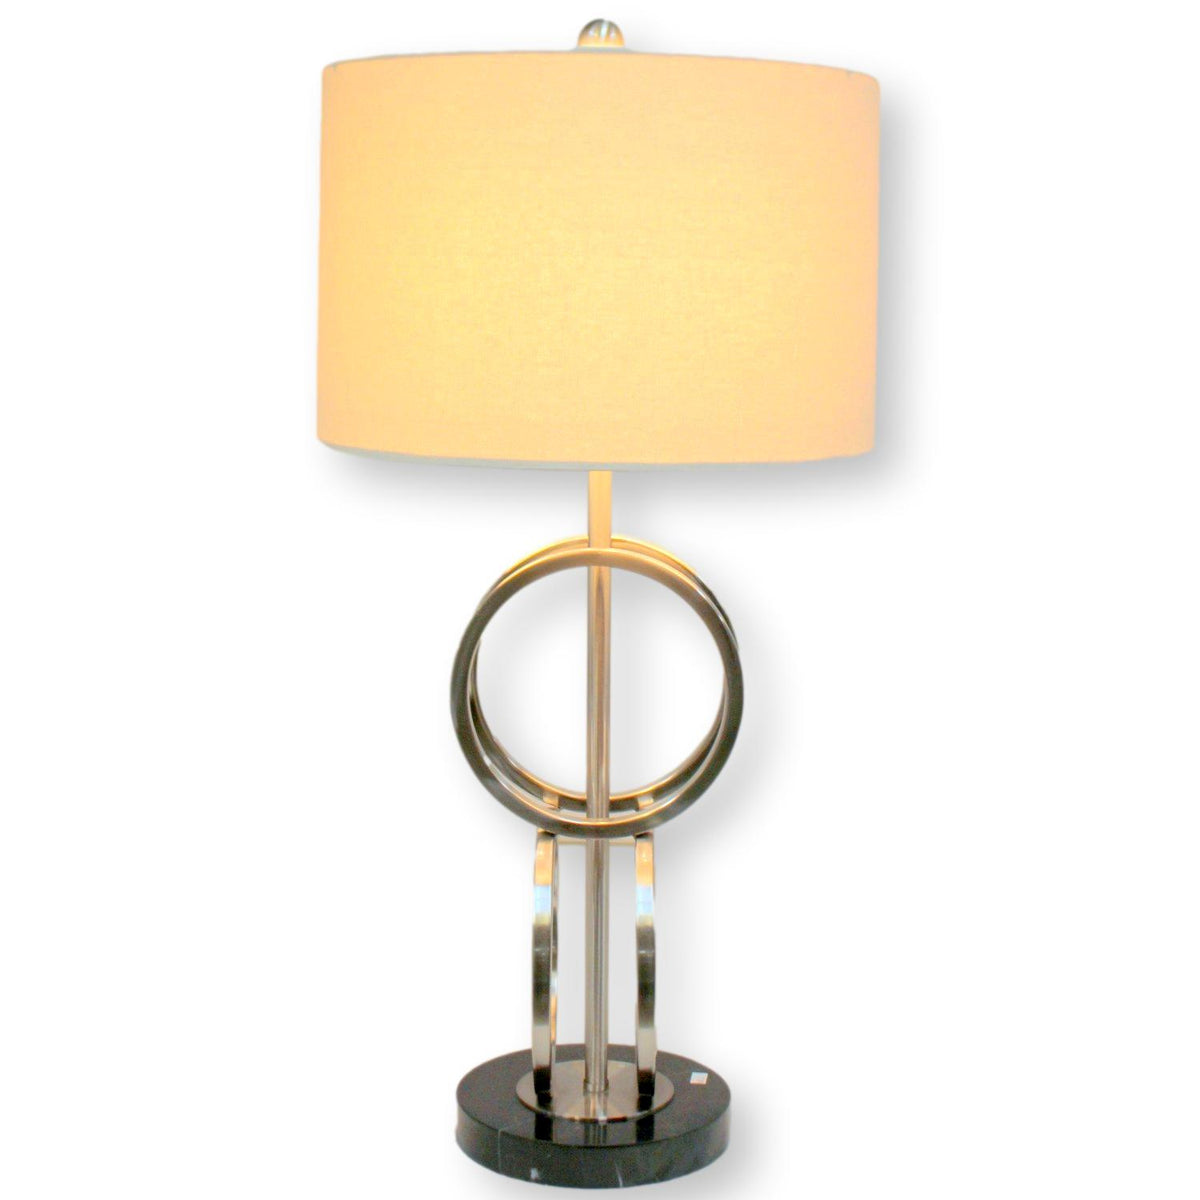 Pottery Barn Stacked Ring Table Lamp